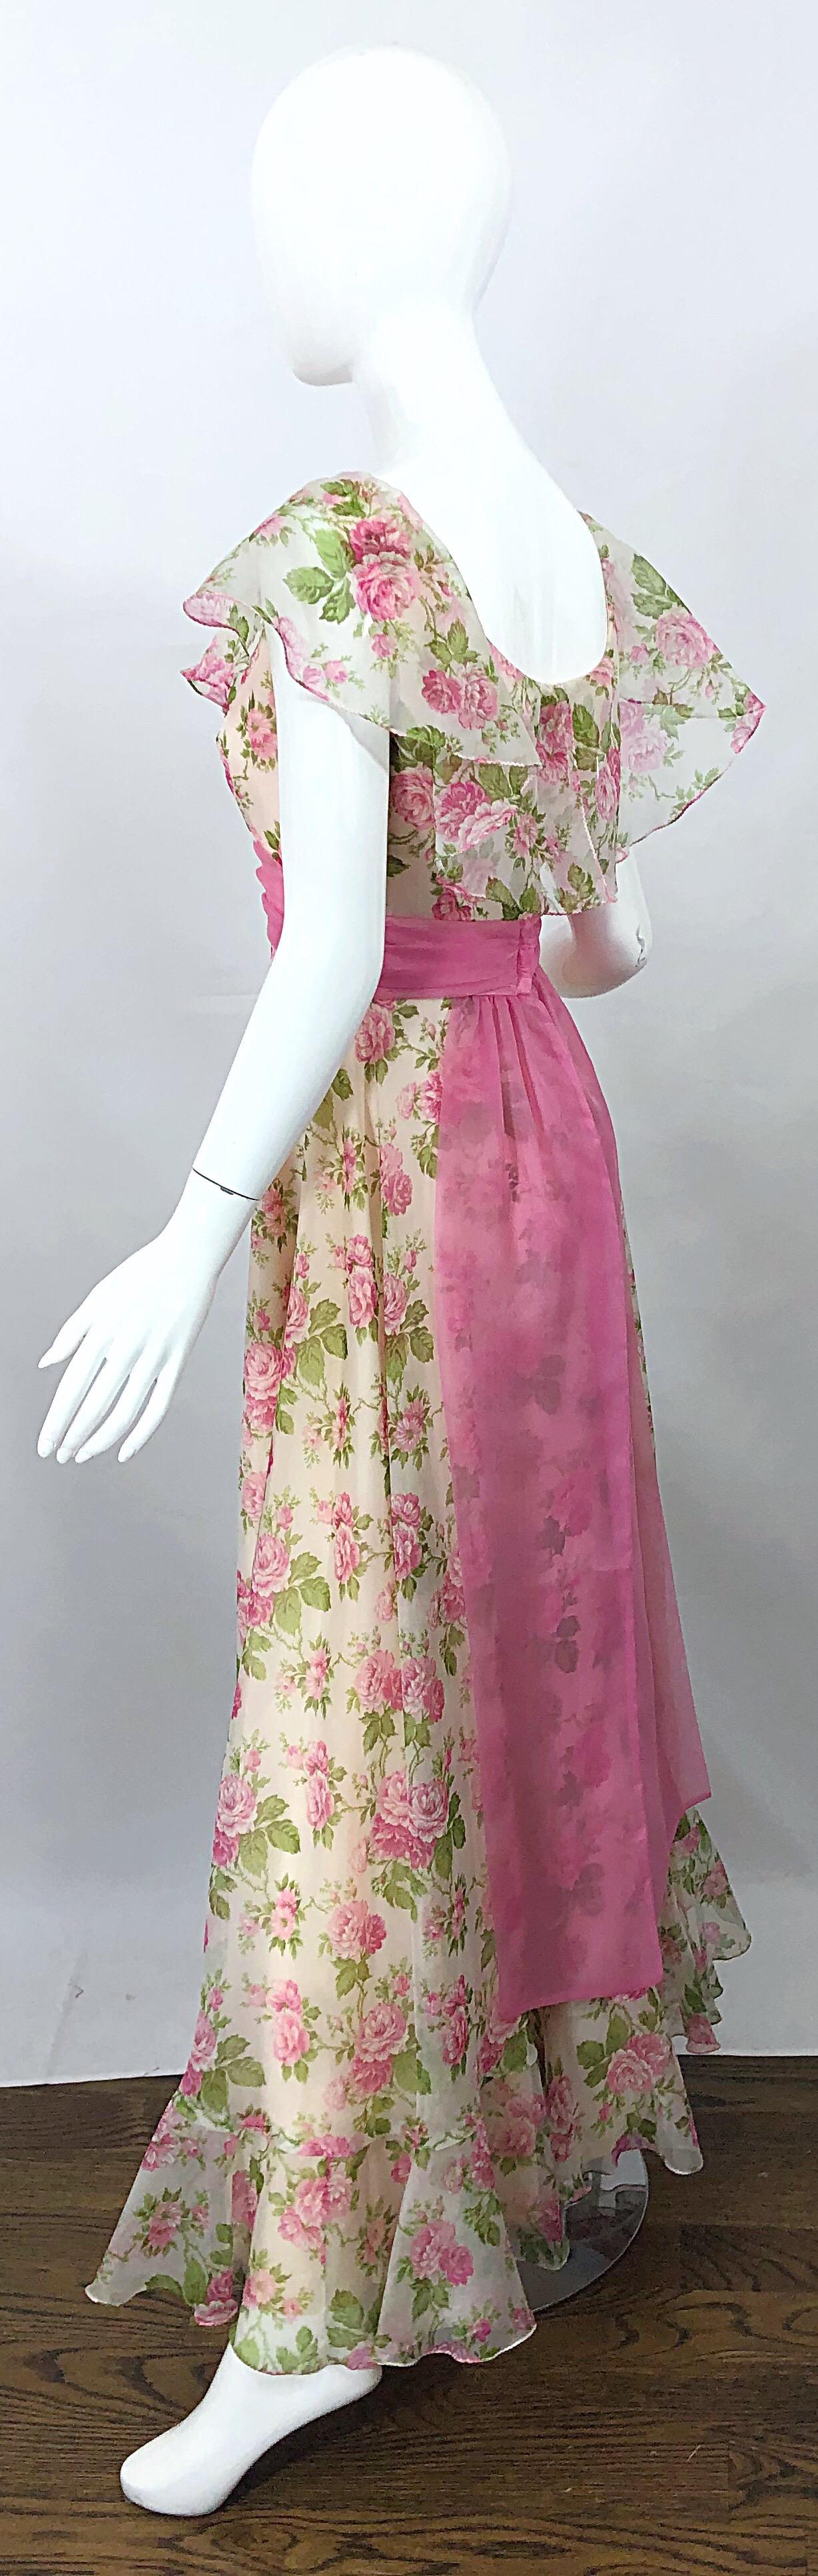 Sylvia Ann 1970s Rose Print Pink Ivory Chiffon Vintage 70s Maxi Dress Gown For Sale 5